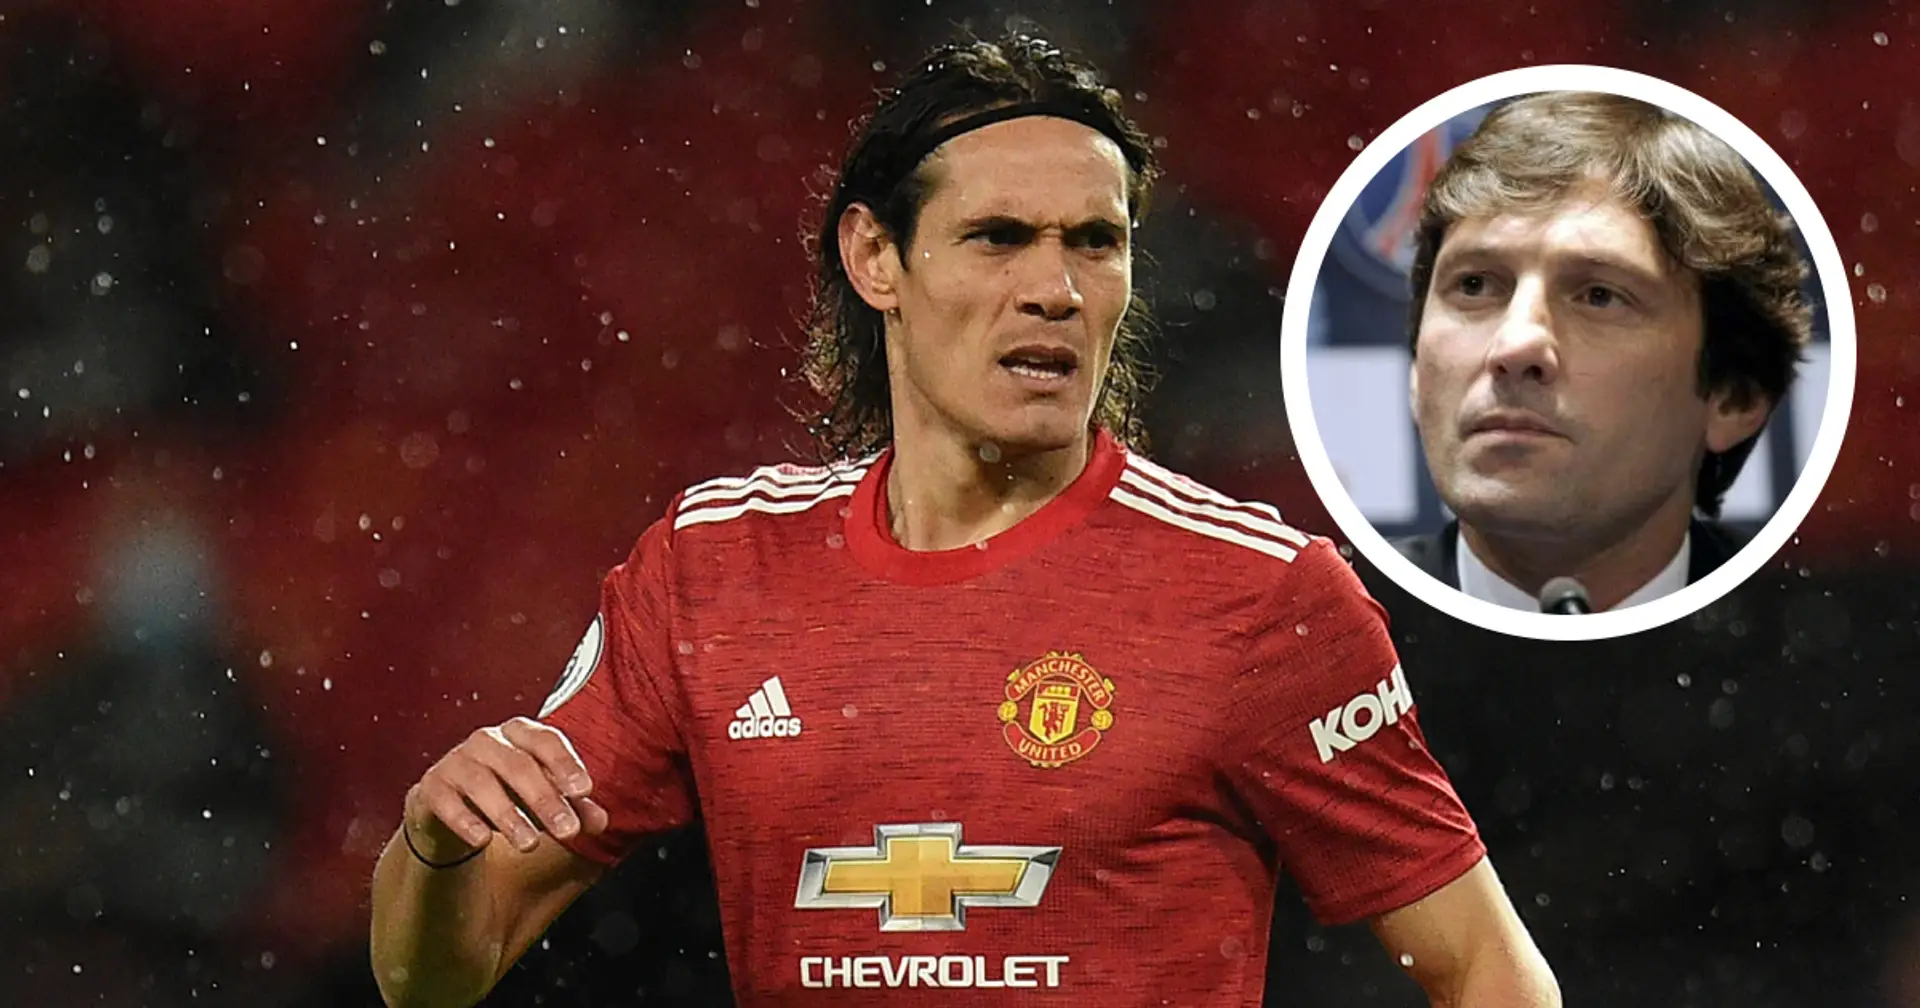 'We could have made a mistake': PSG sporting director Leonardo on Edinson Cavani transfer to Man United 